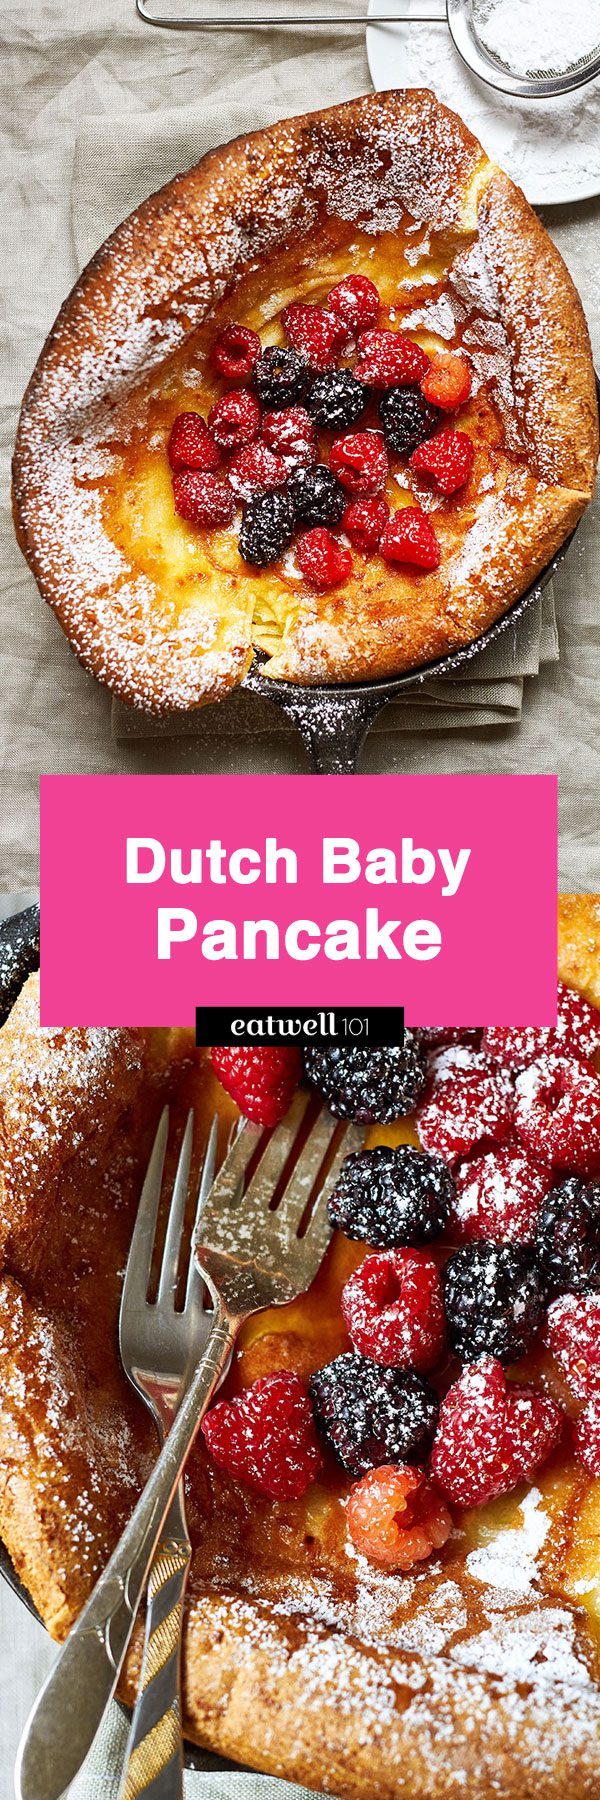 Dutch Baby Pancake - Easy, delicious and surprisingly simple, this hot and fluffy pancake is perfect for breakfast, brunch or dessert.